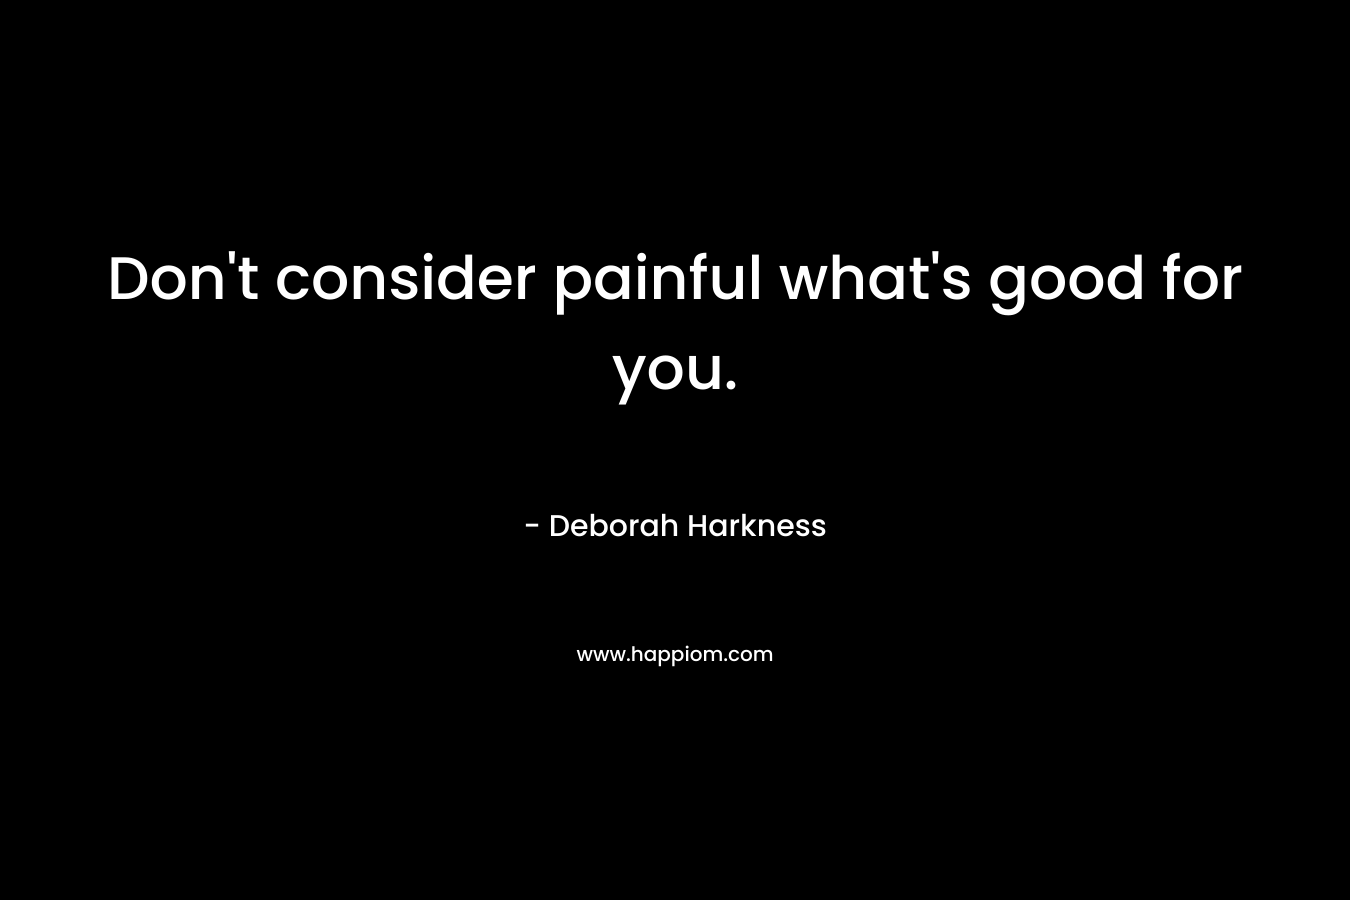 Don’t consider painful what’s good for you. – Deborah Harkness